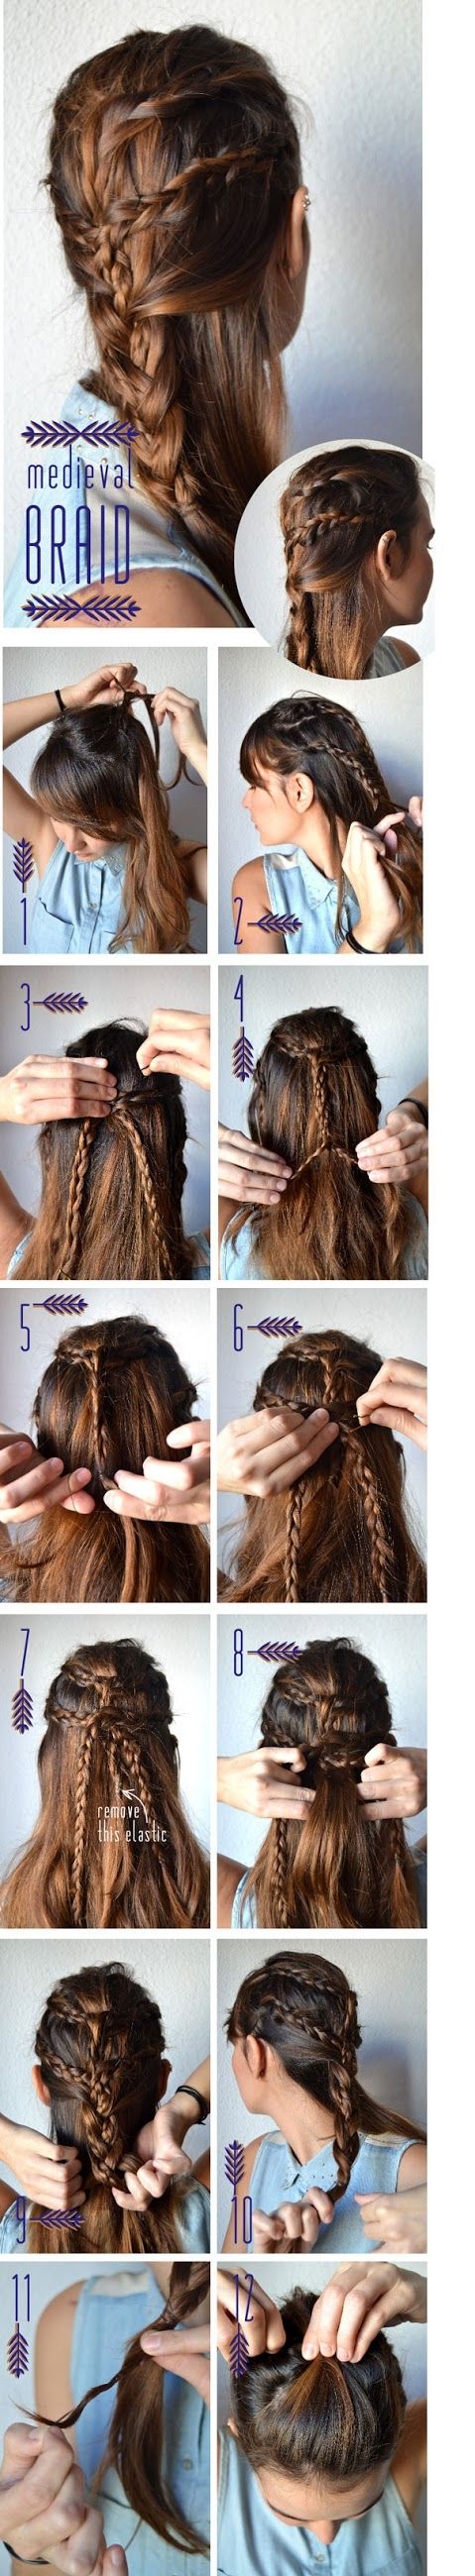 15 Stylish Mermaid Hairstyles to Pair Your Looks